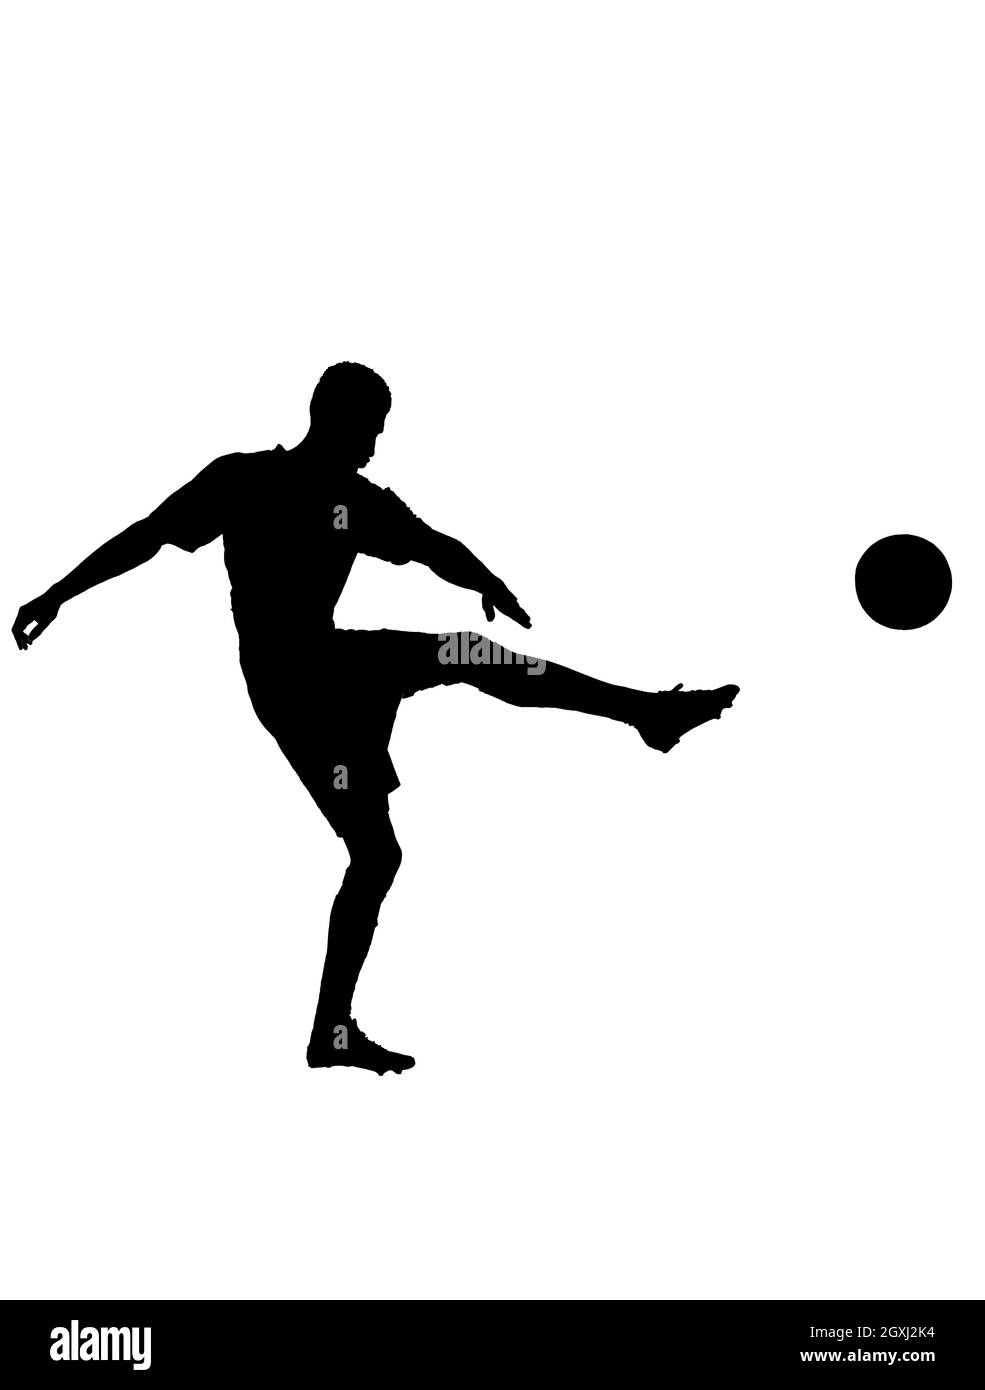 soccer player black and white